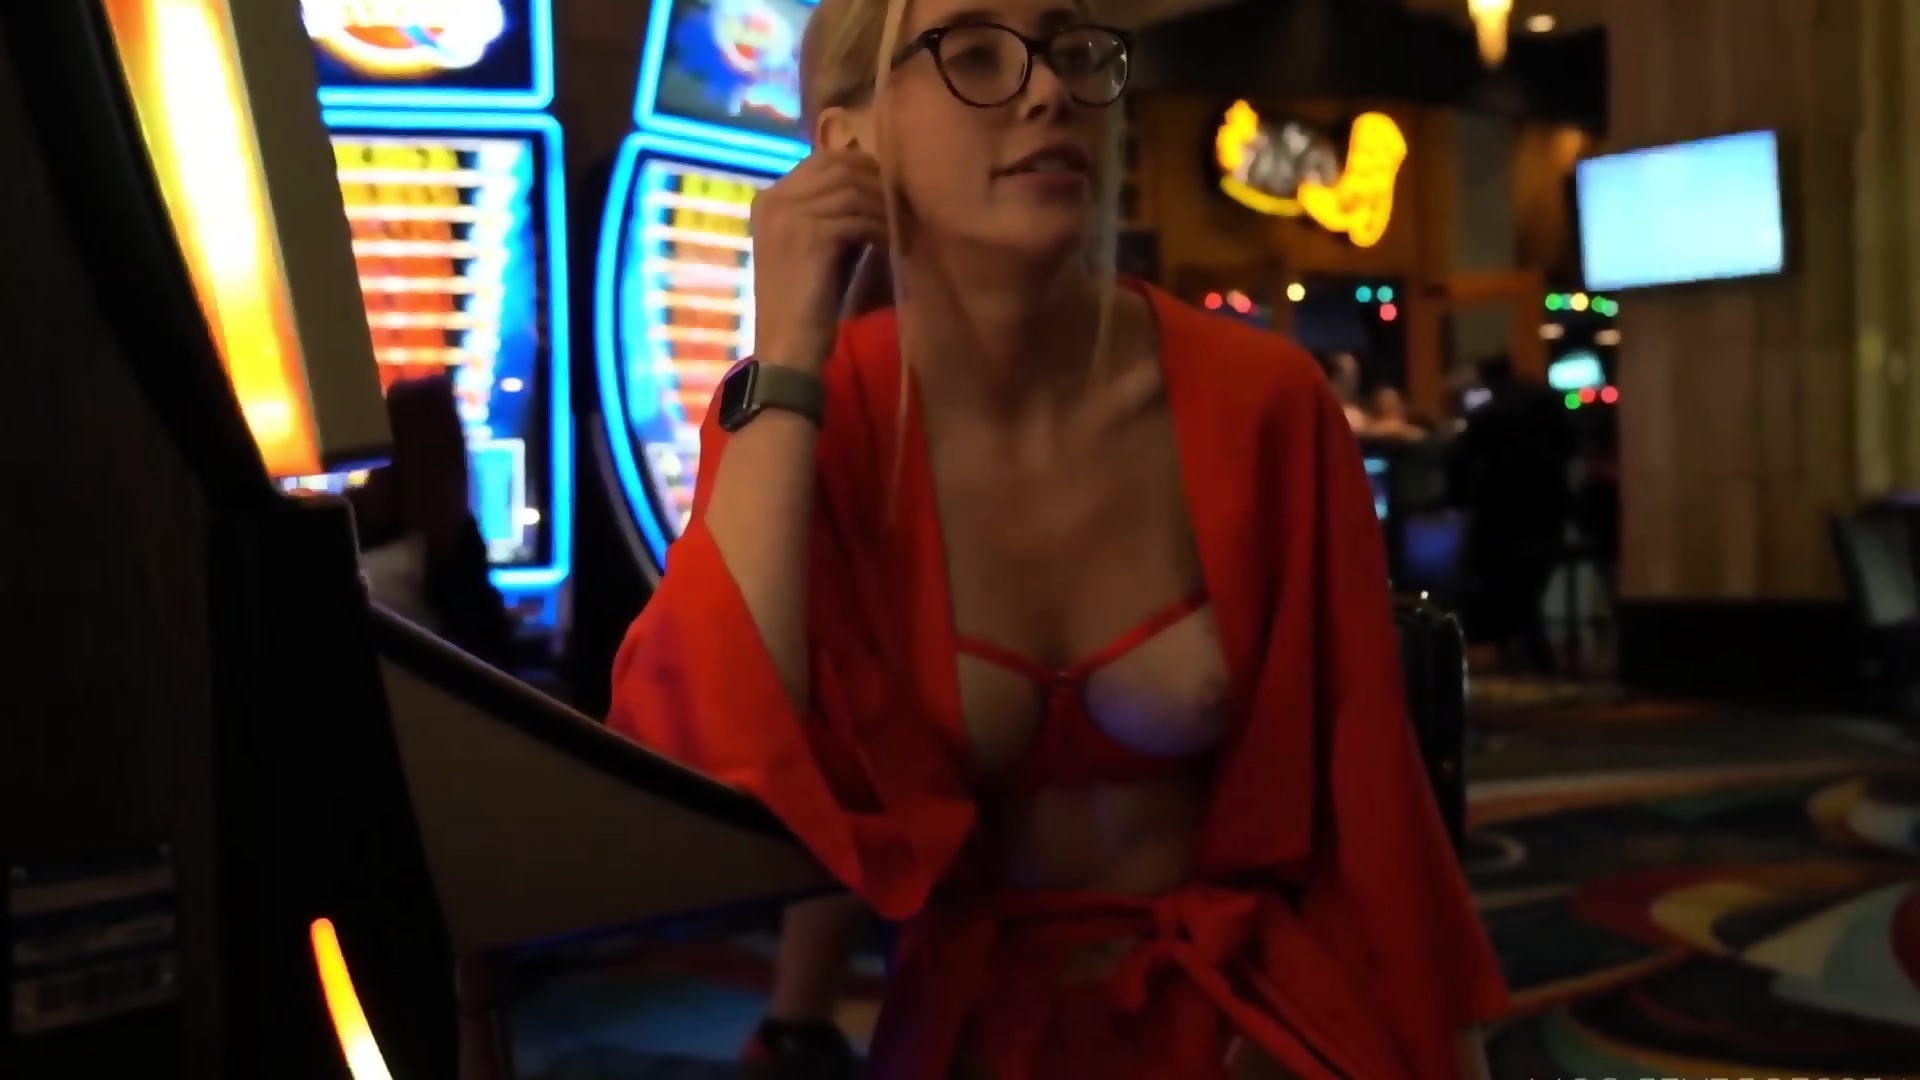 Sexy Amateur Milf Picks Up At The Casino, Fucks Him And Leaves - Dan Damage  image